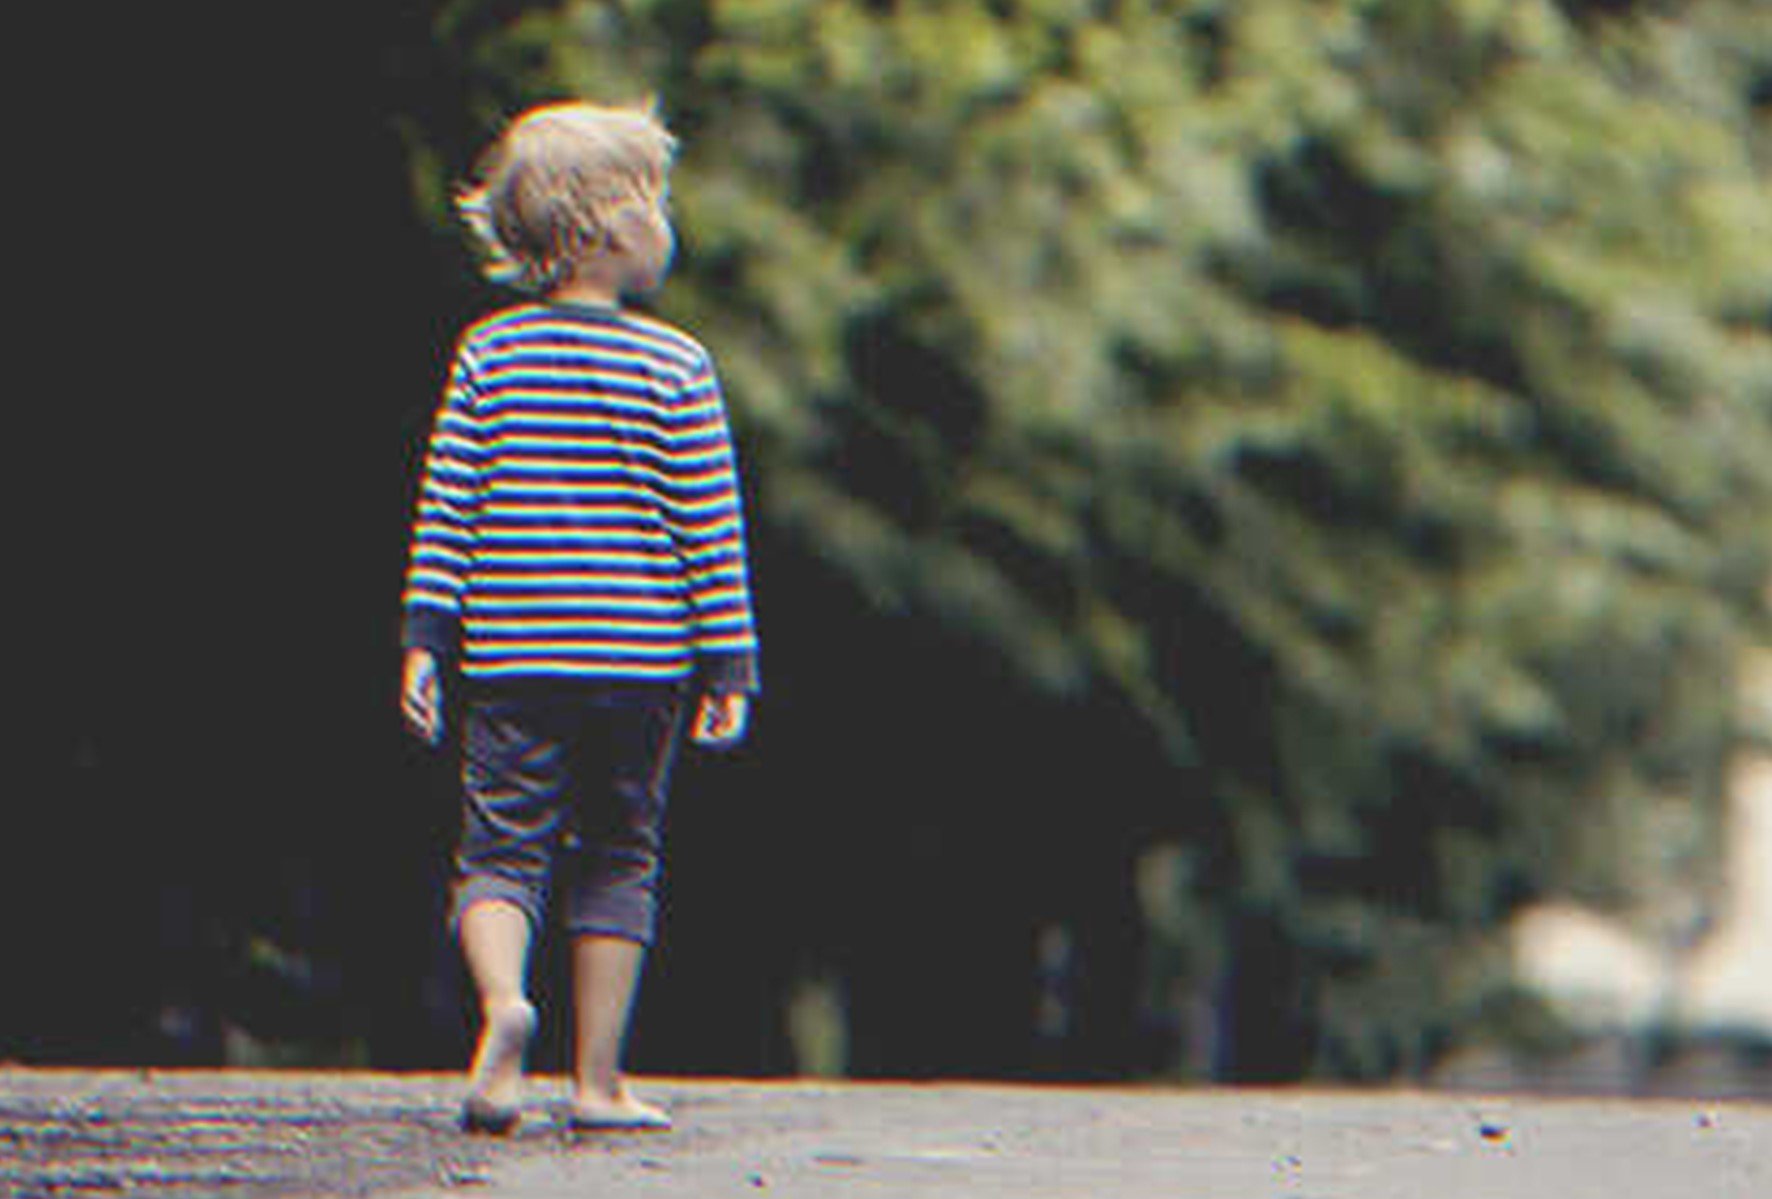 There was a barefoot boy by the side of the road. | Source: Shutterstock.com